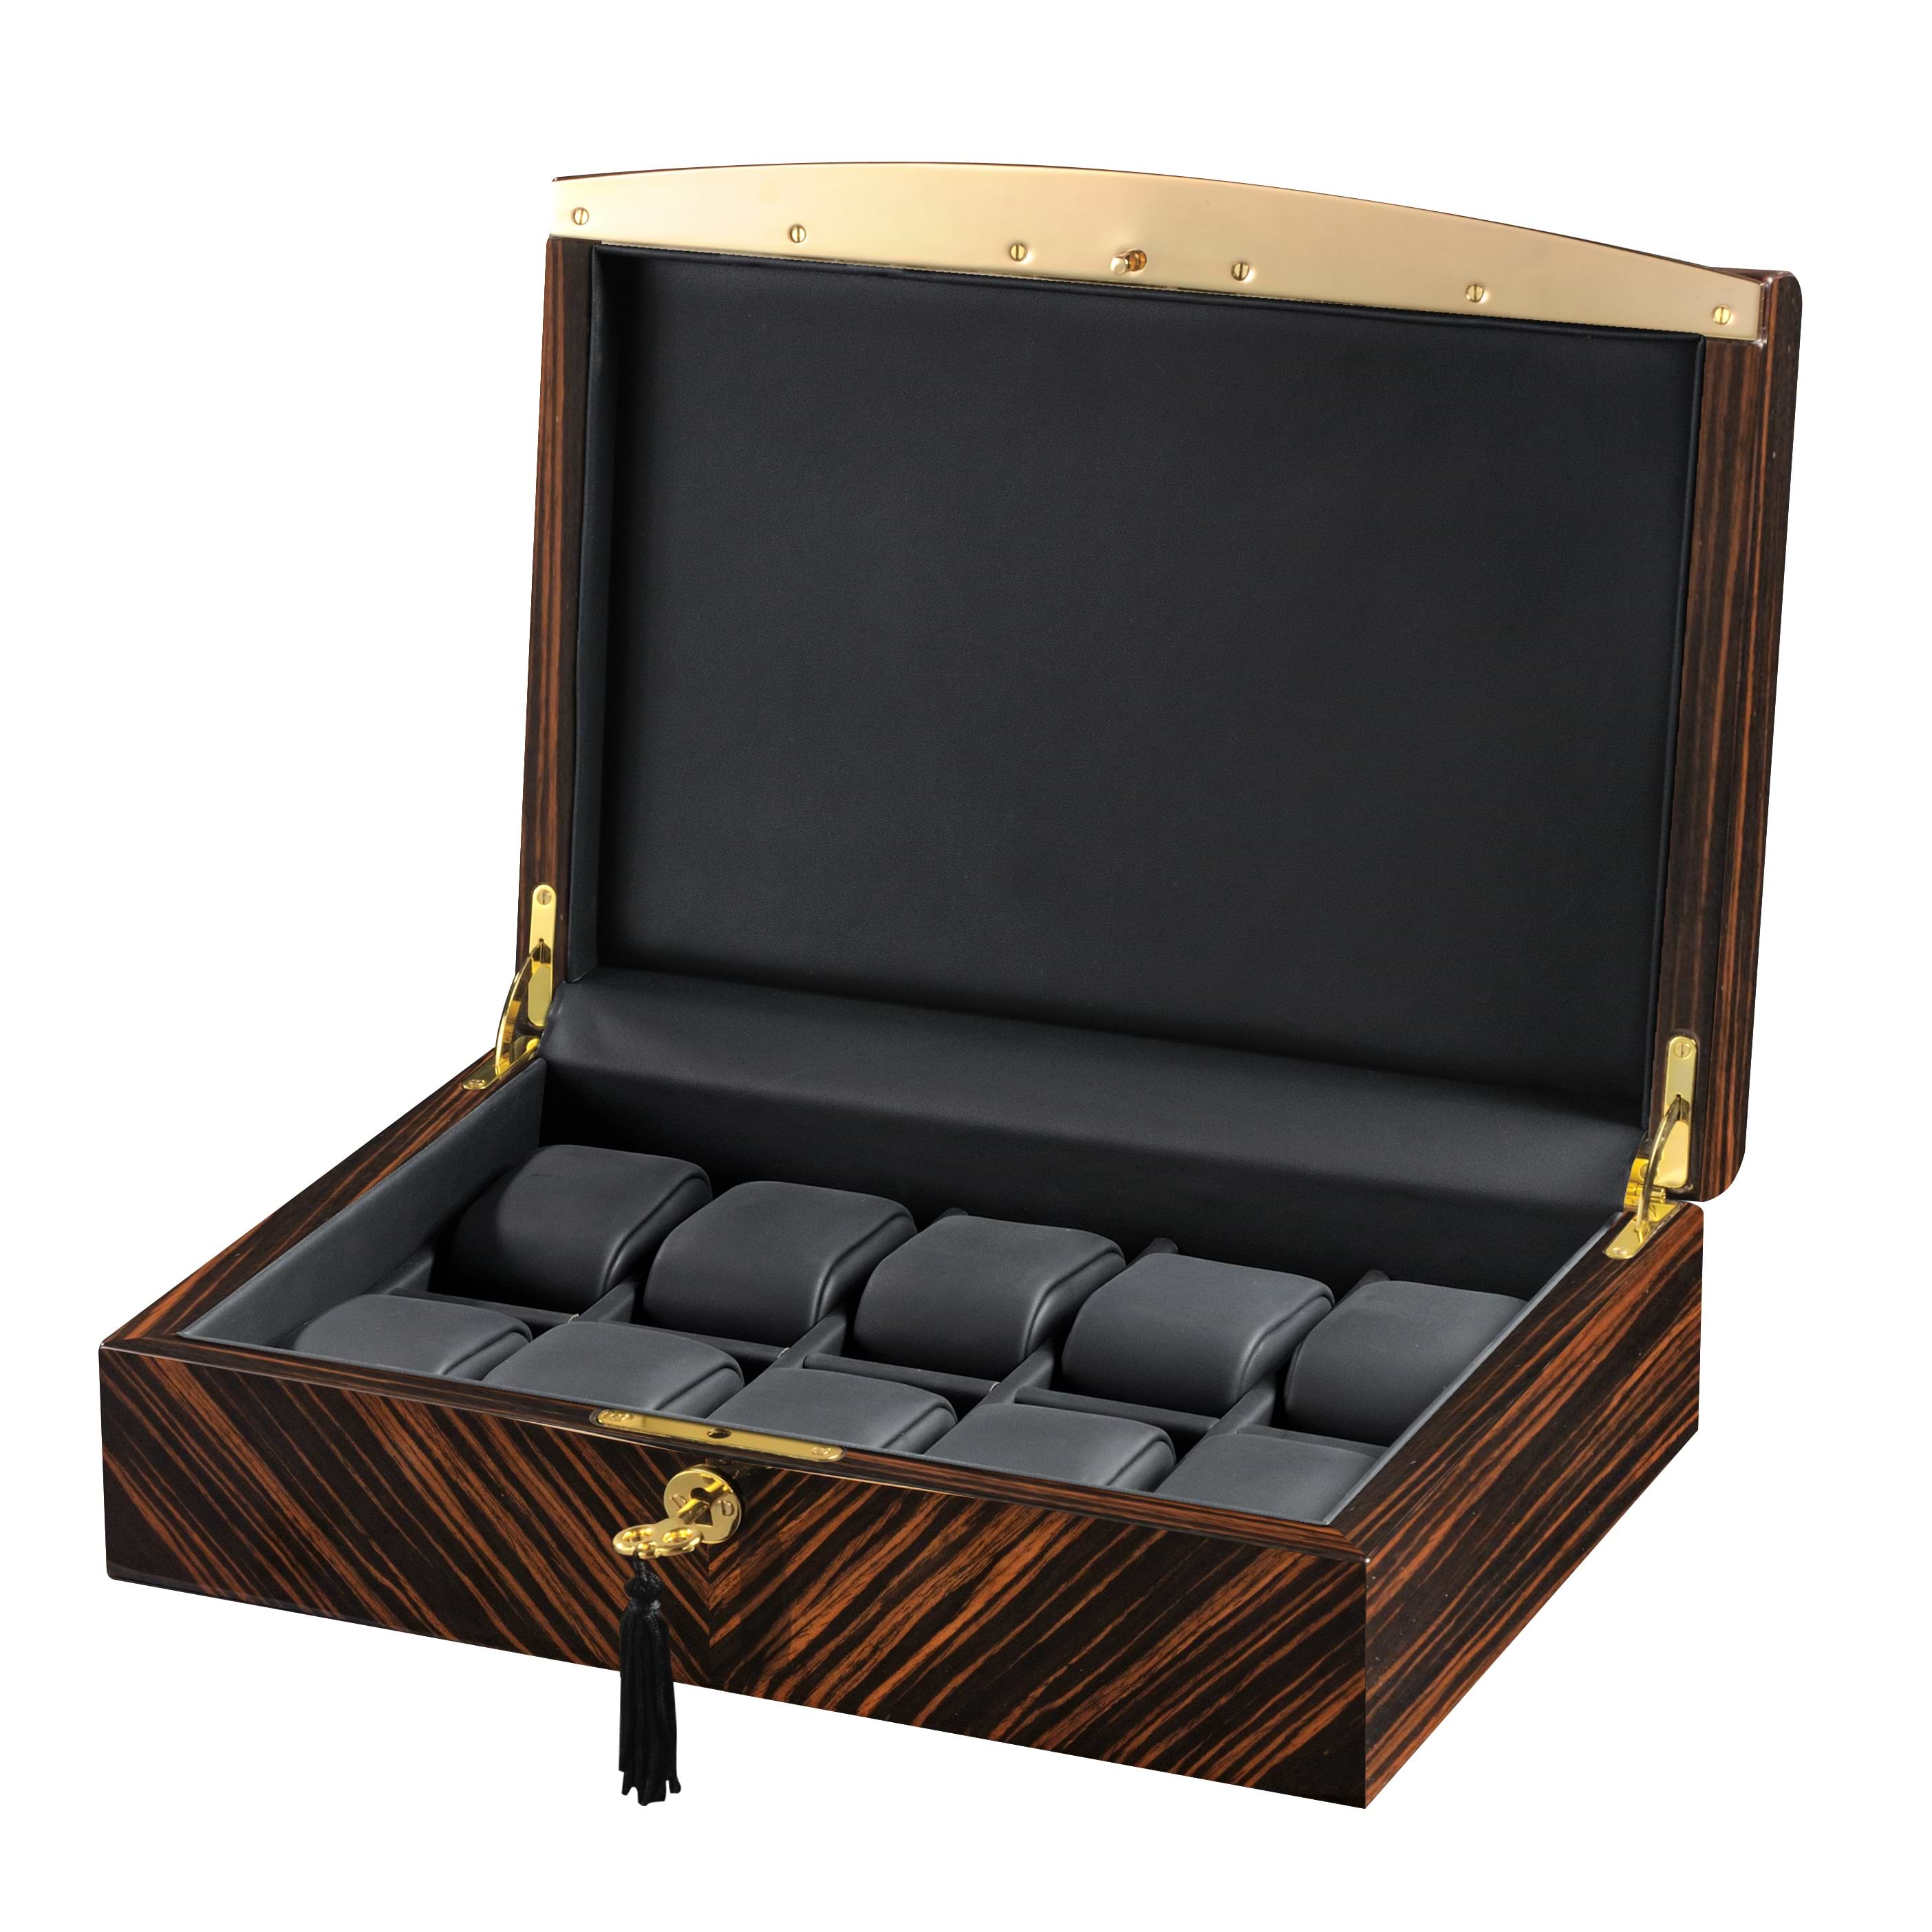 High Gloss Ebony Wood & Accents Ten Watch Case Black Leather Interior